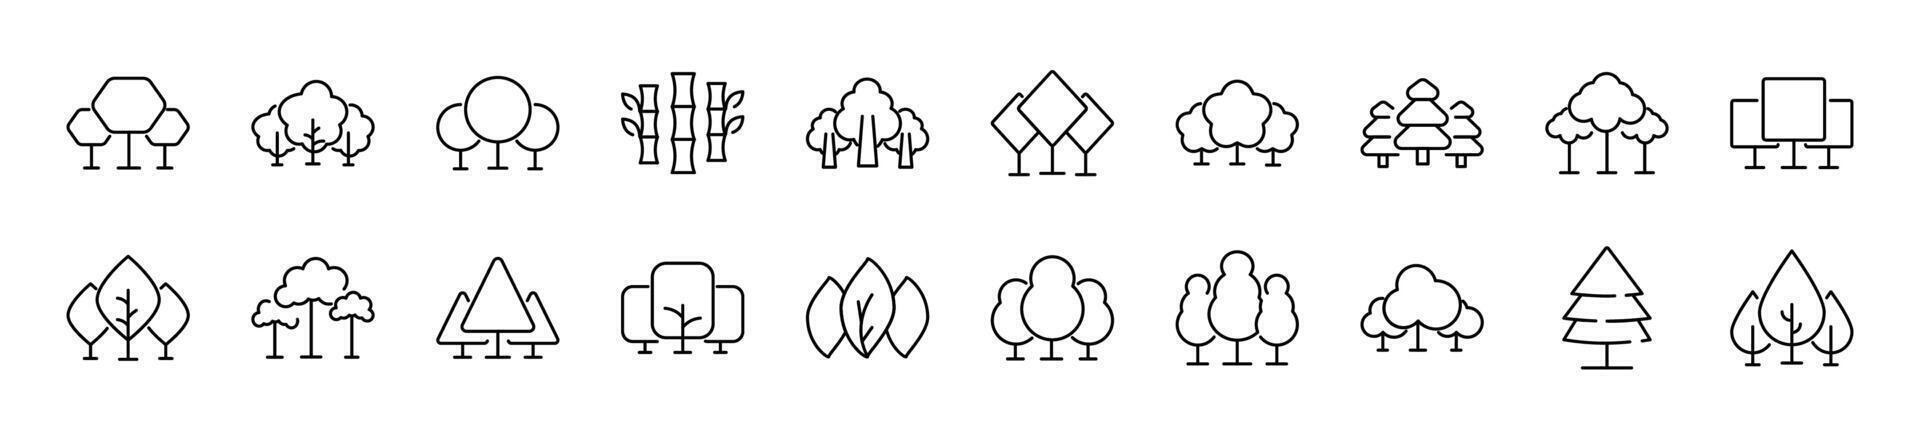 Pack of linear symbols of tree. Editable stroke. Linear symbol for web sites, newspapers, articles book vector